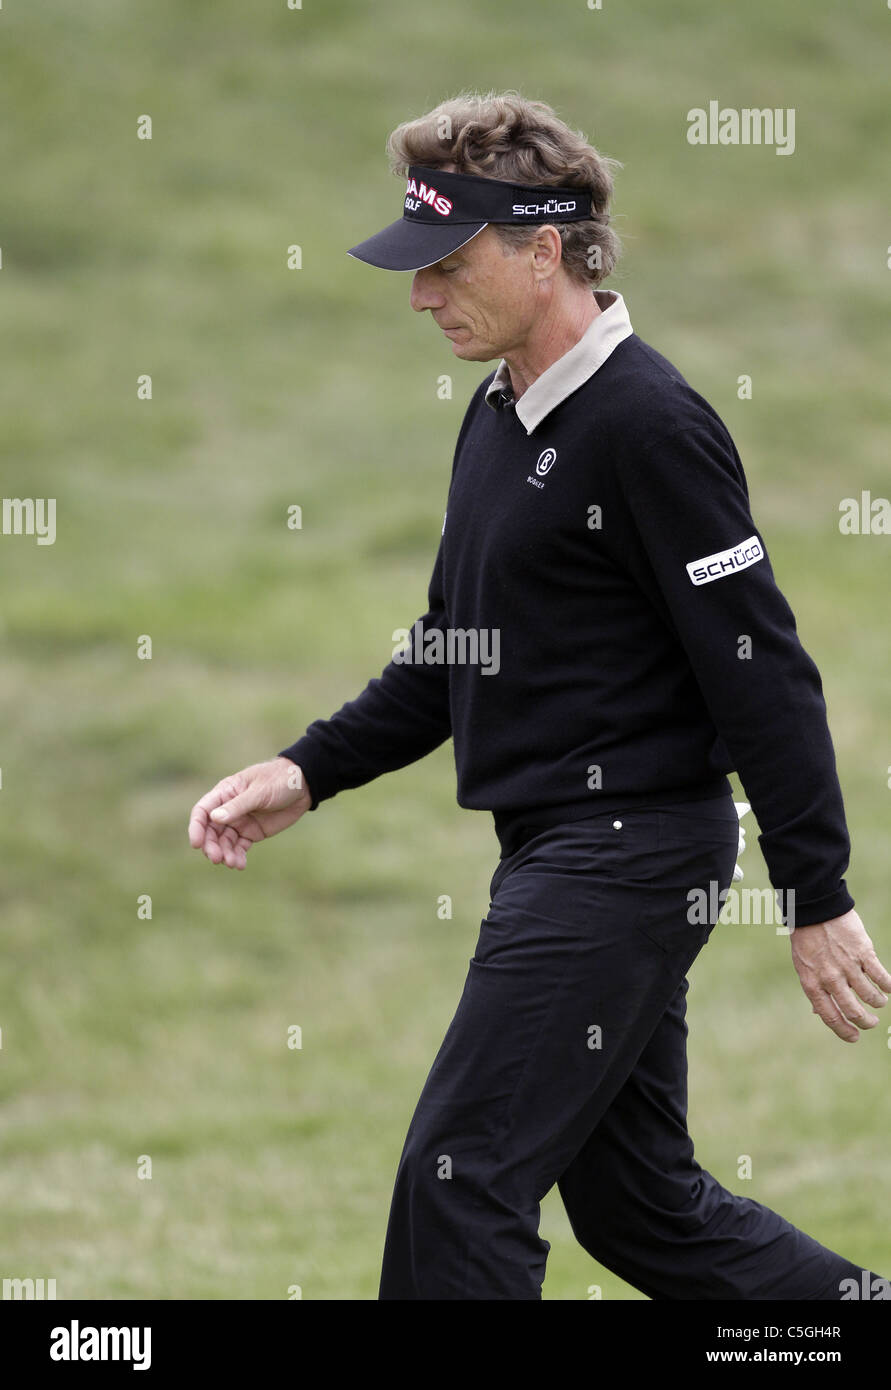 BERNHARD LANGER AFTER TAKING 8 THE OPEN CHAMPIONSHIP ROYAL ST.GEORGE'S SANDWICH KENT ENGLAND 14 July 2011 Stock Photo